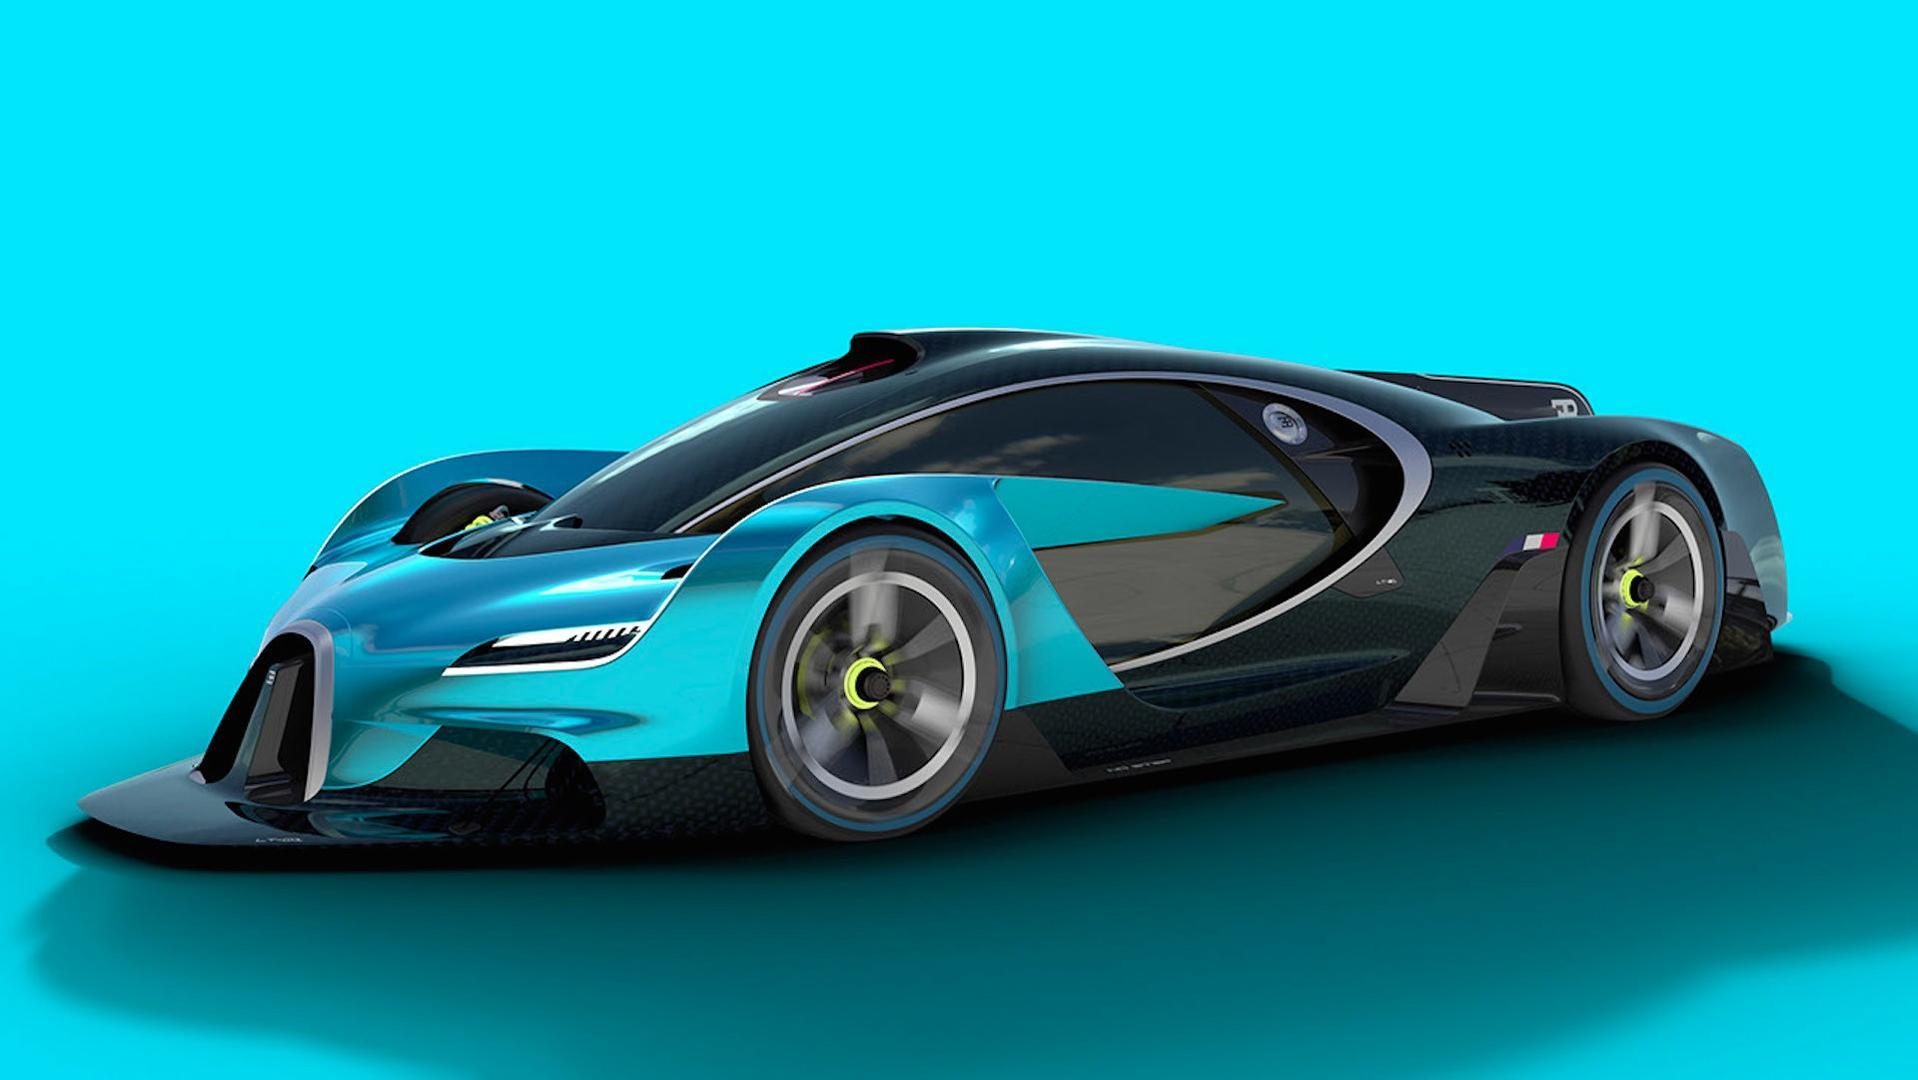 Bugatti Rendering Imagines A Race Ready Hypercar Of The Future